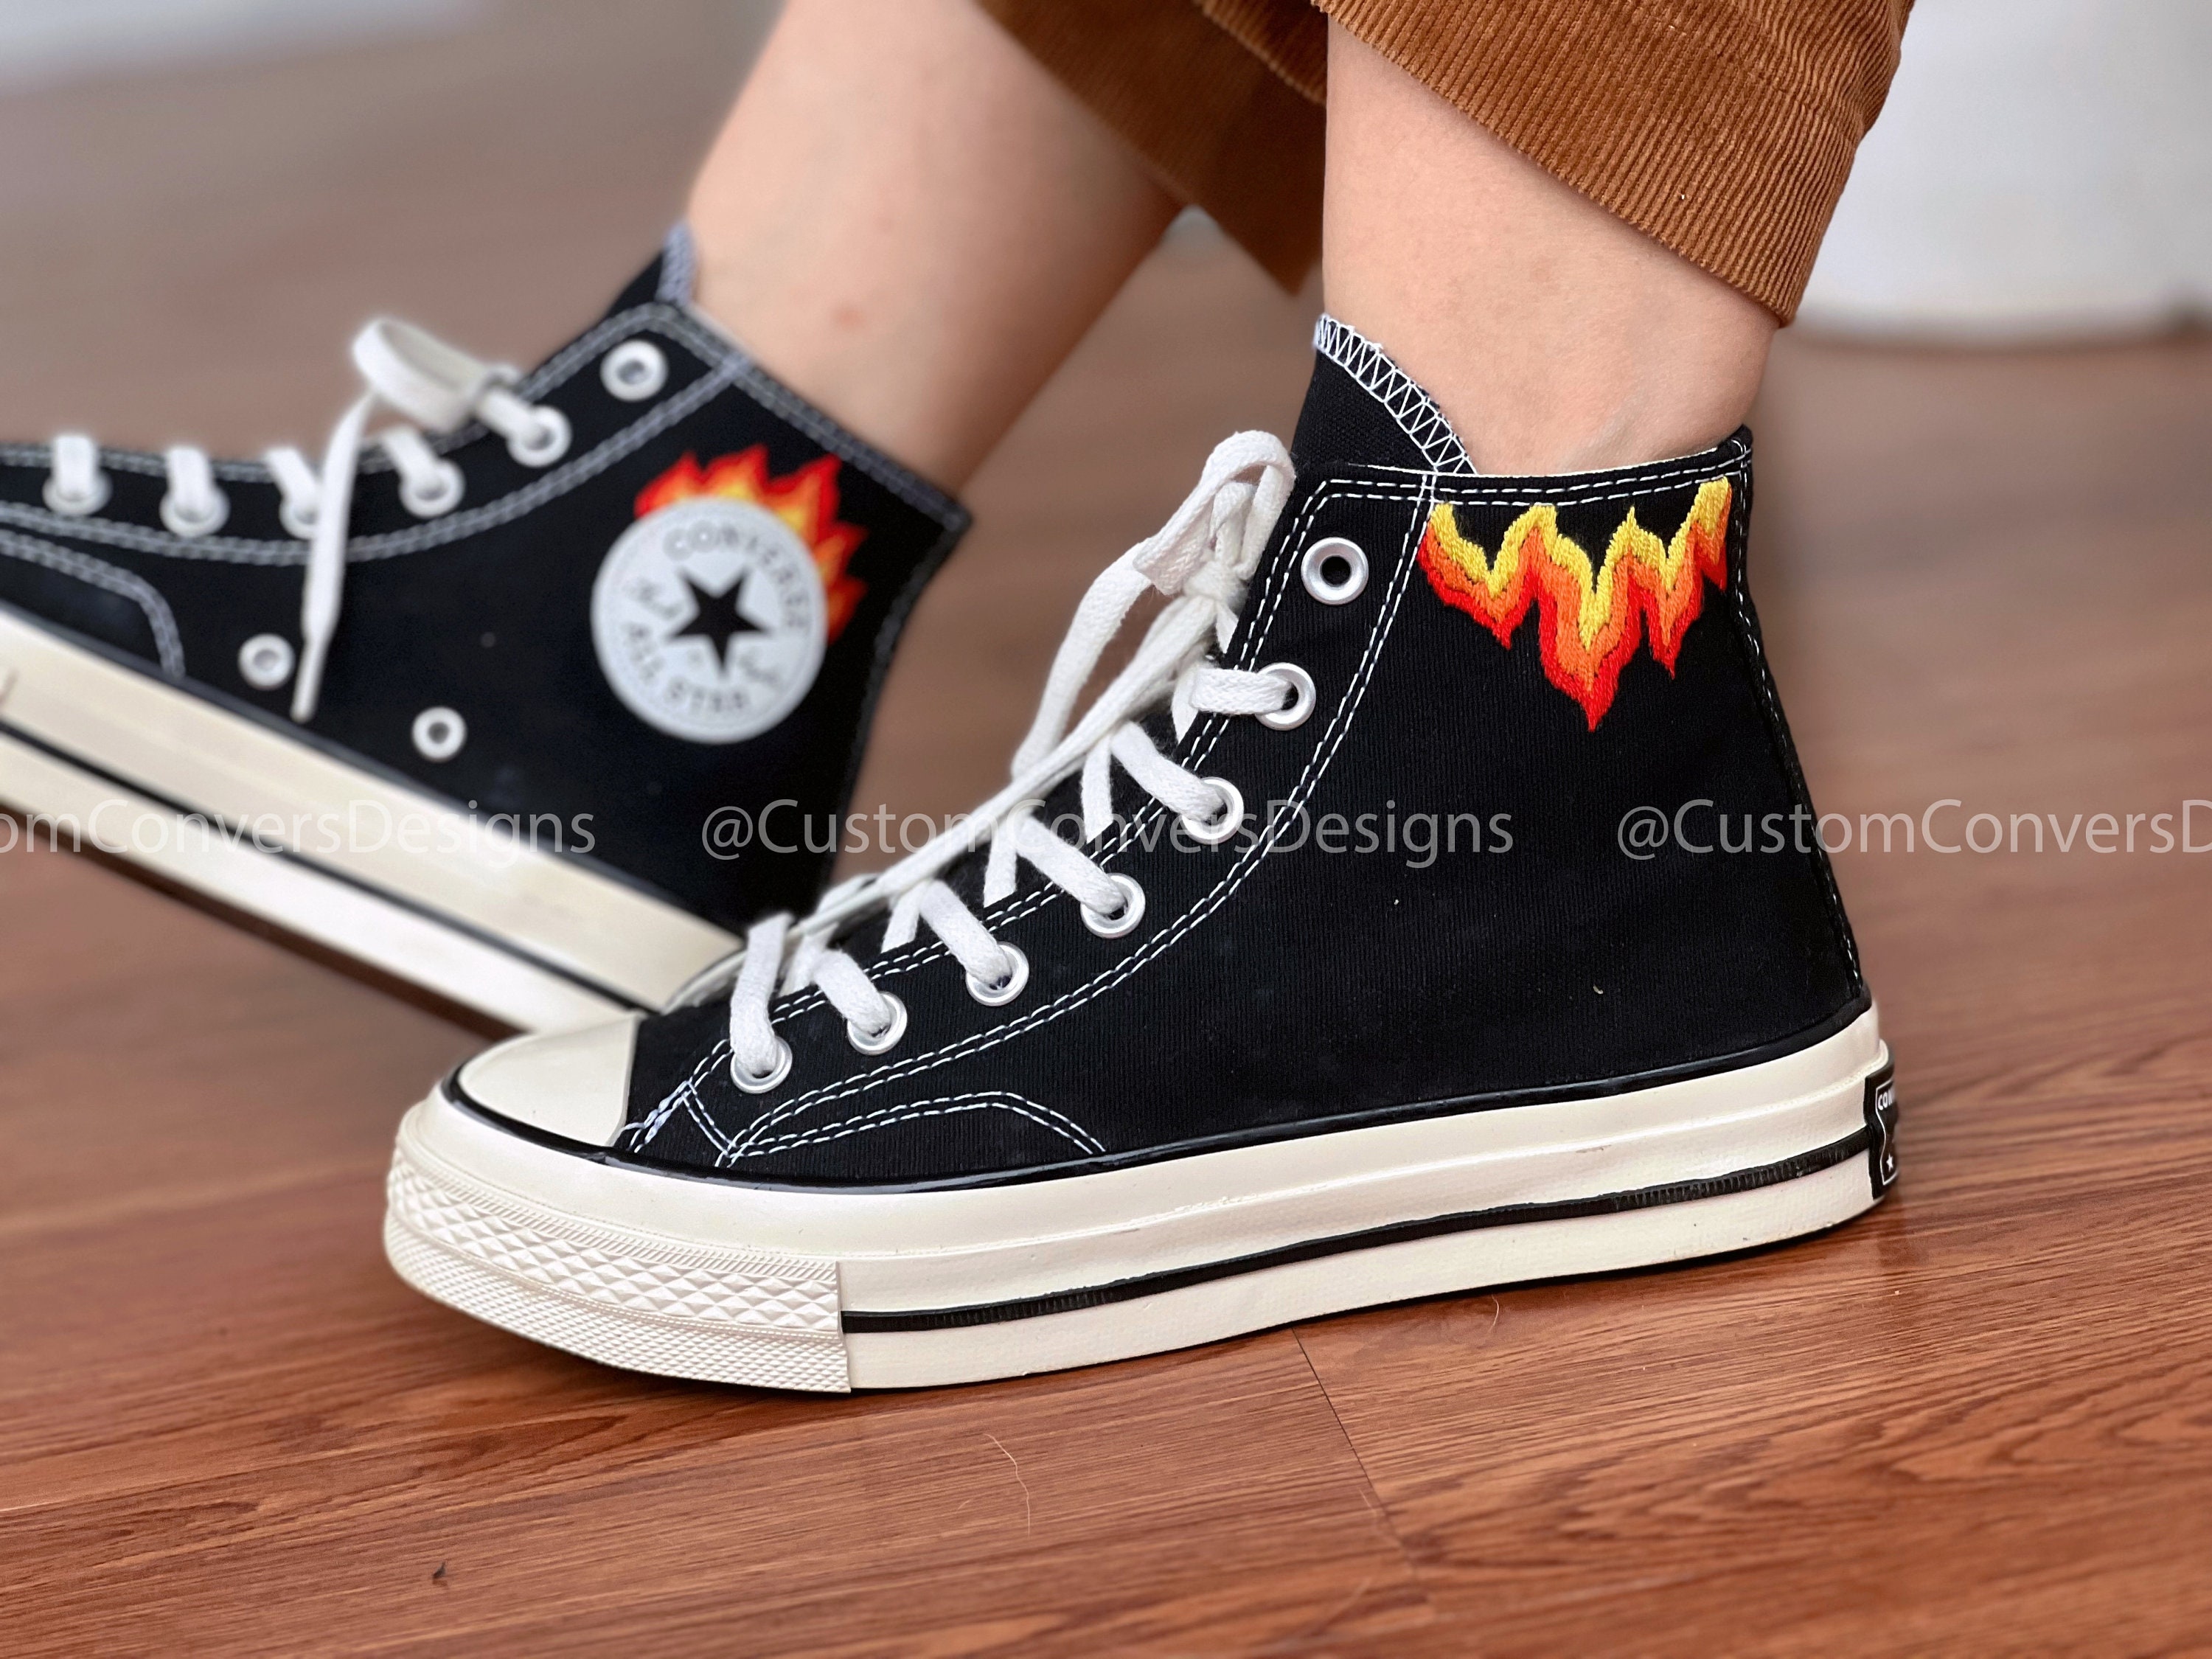 Custom Converse Chuck Taylor 1970s/embroidered Fire